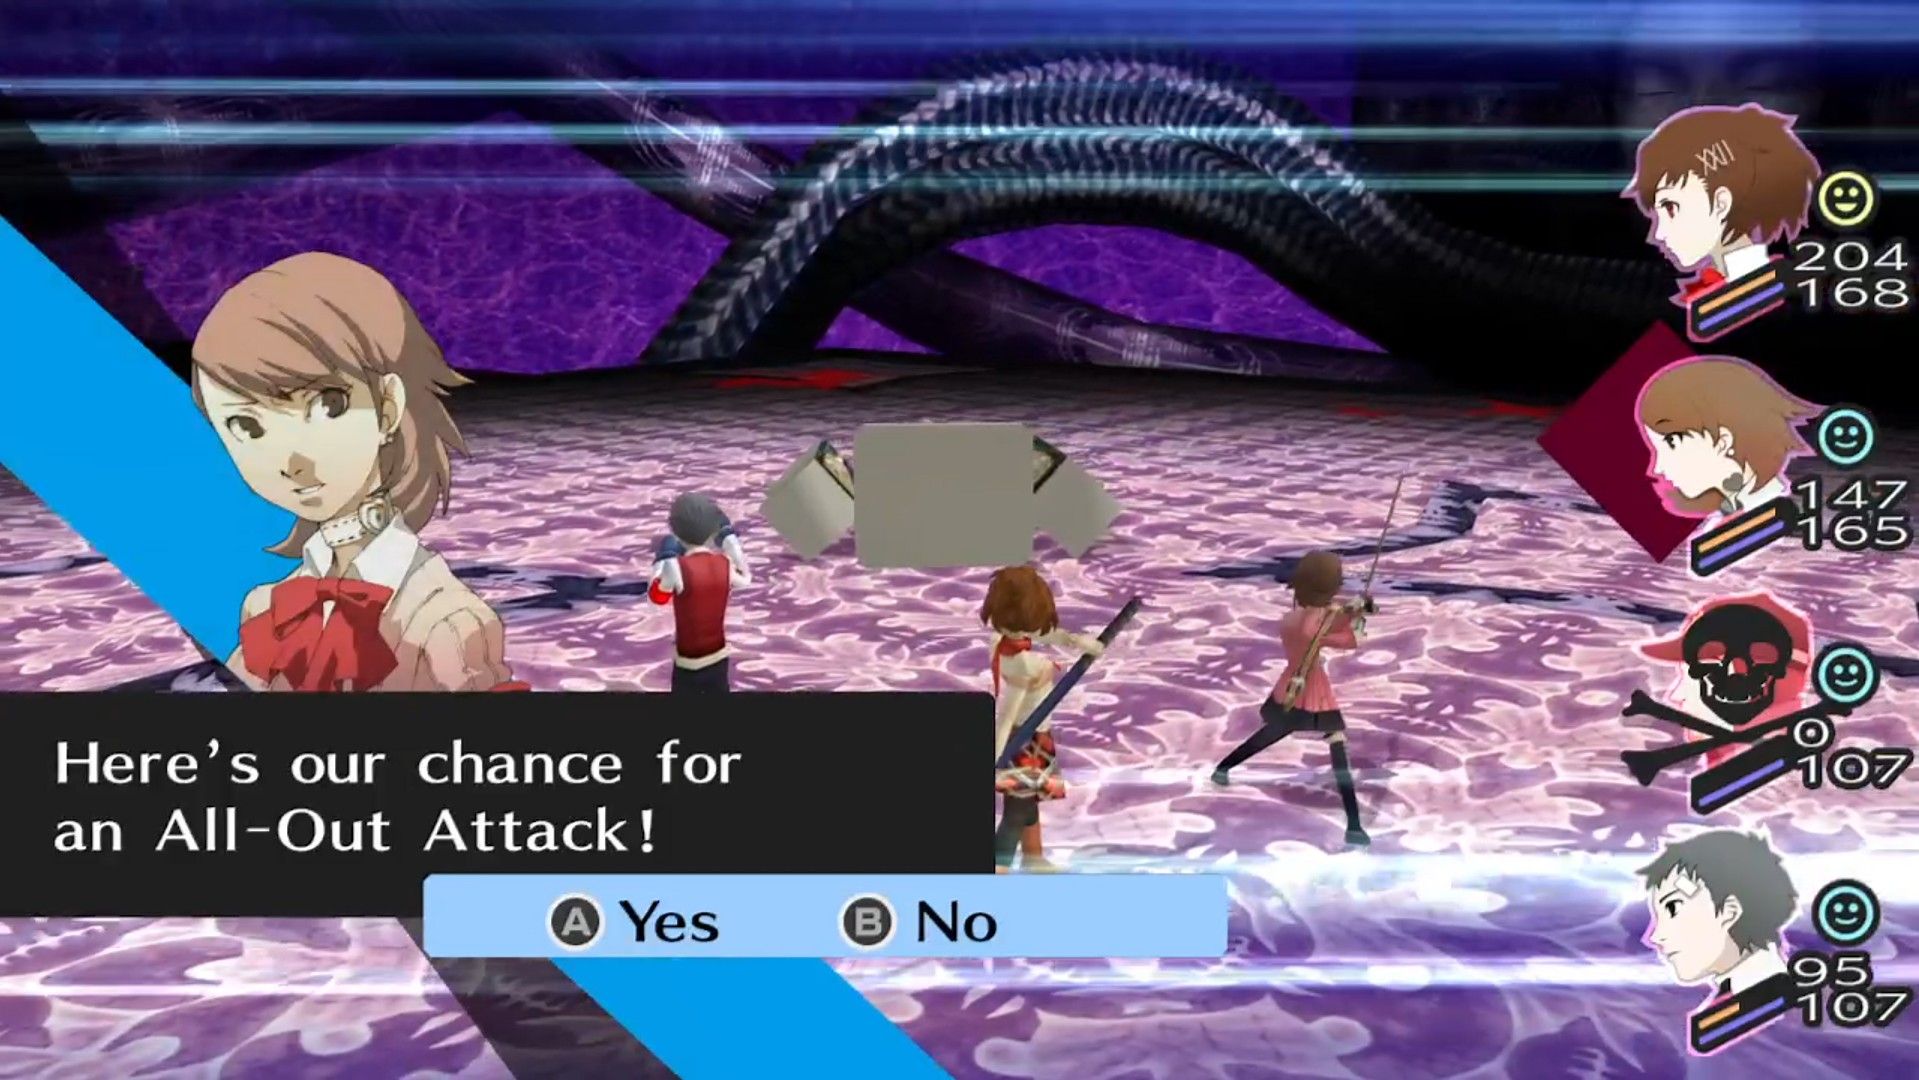 yukari triggering an all-out attack on change relic in persona 3 portable